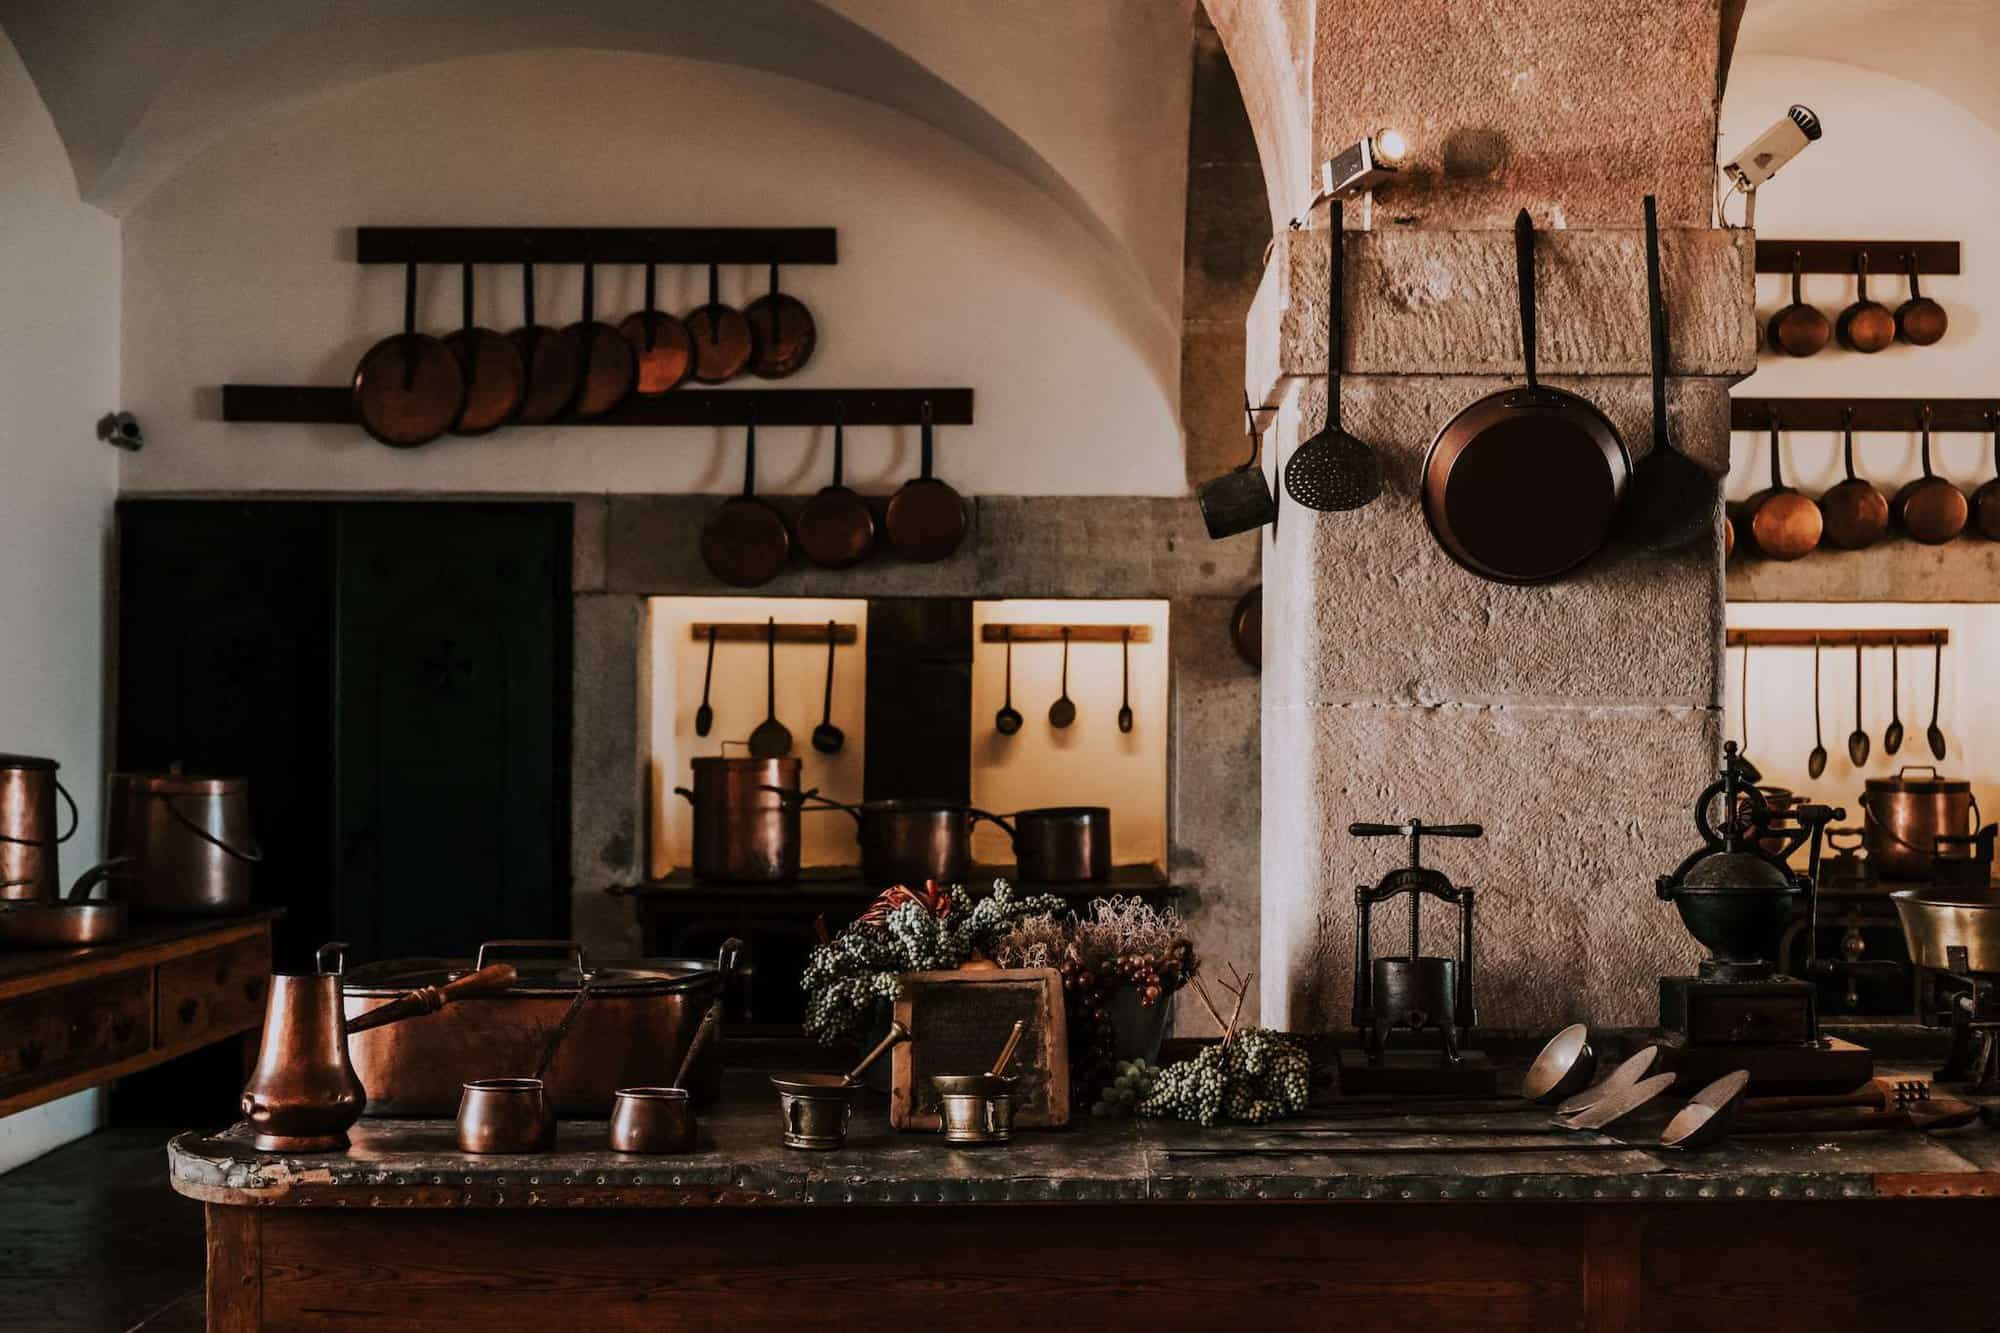 a traditional kitchen with a wooden table. there are many copper utensils neatly organised across the room, pots and cutlery on the table and copper pans hung up on the walls